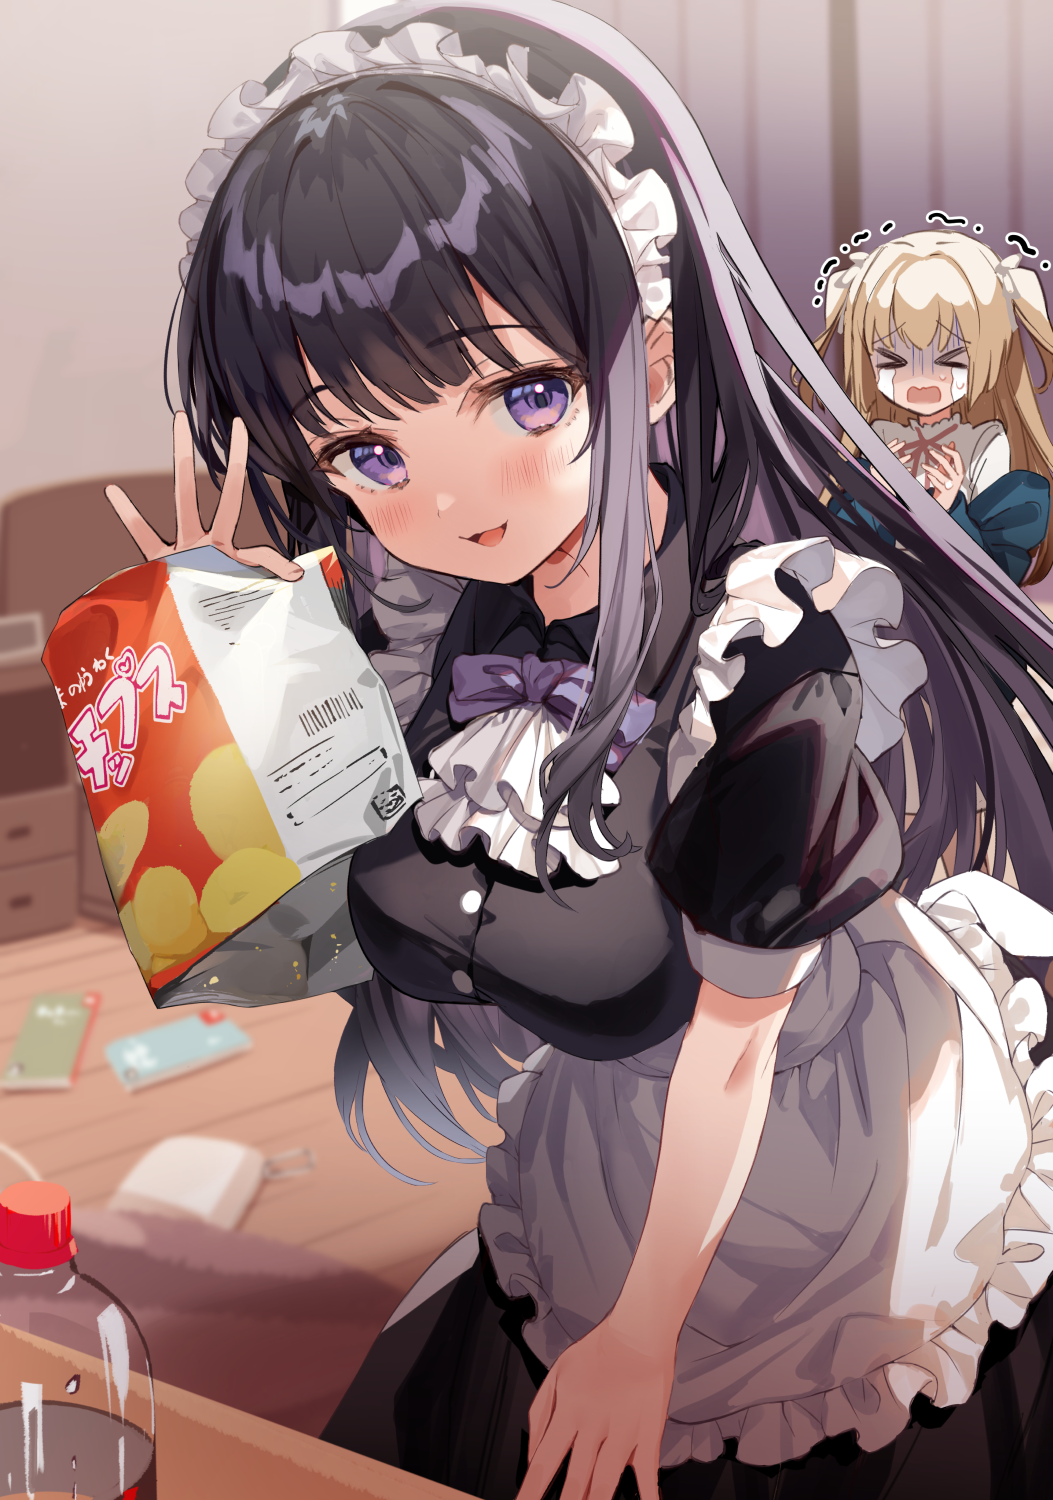 Wallpaper, anime girls, maid outfit, vertical 1053x1500